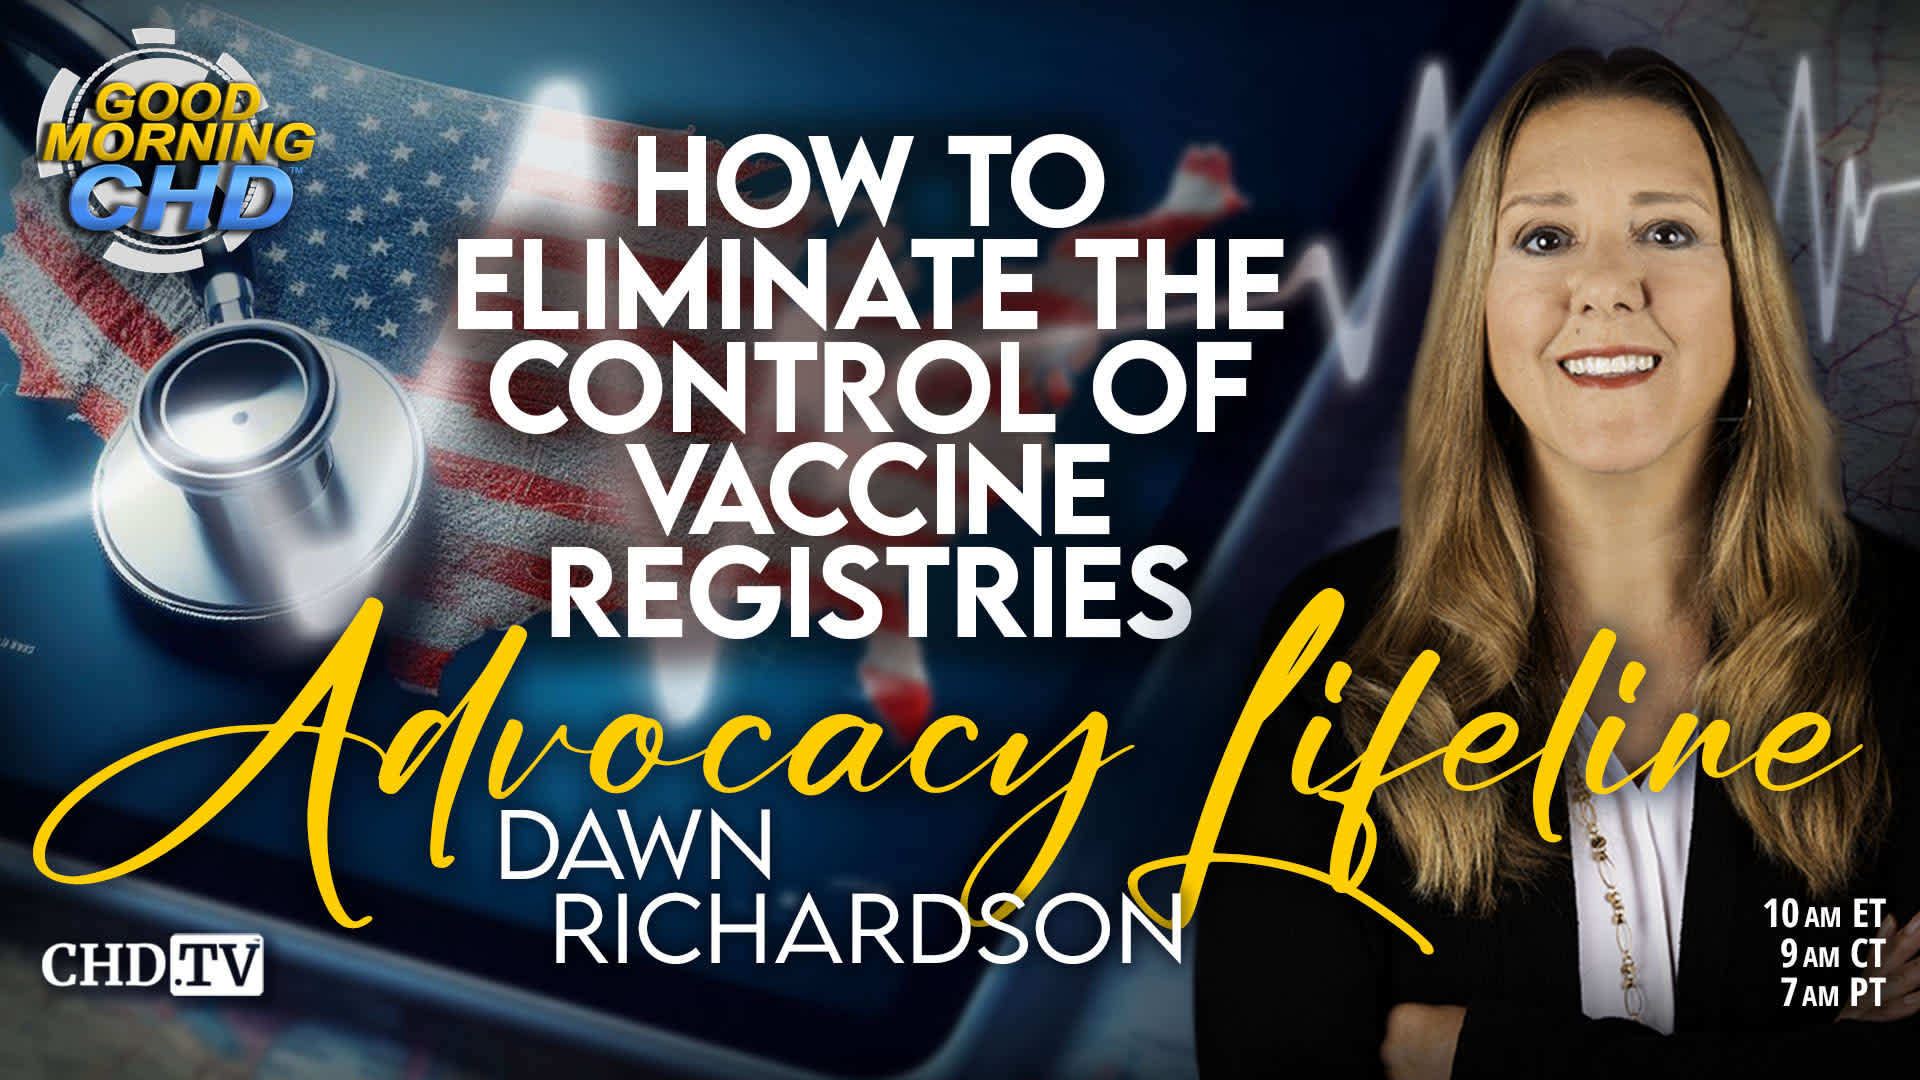 How to Eliminate the Control of Vaccine Registries